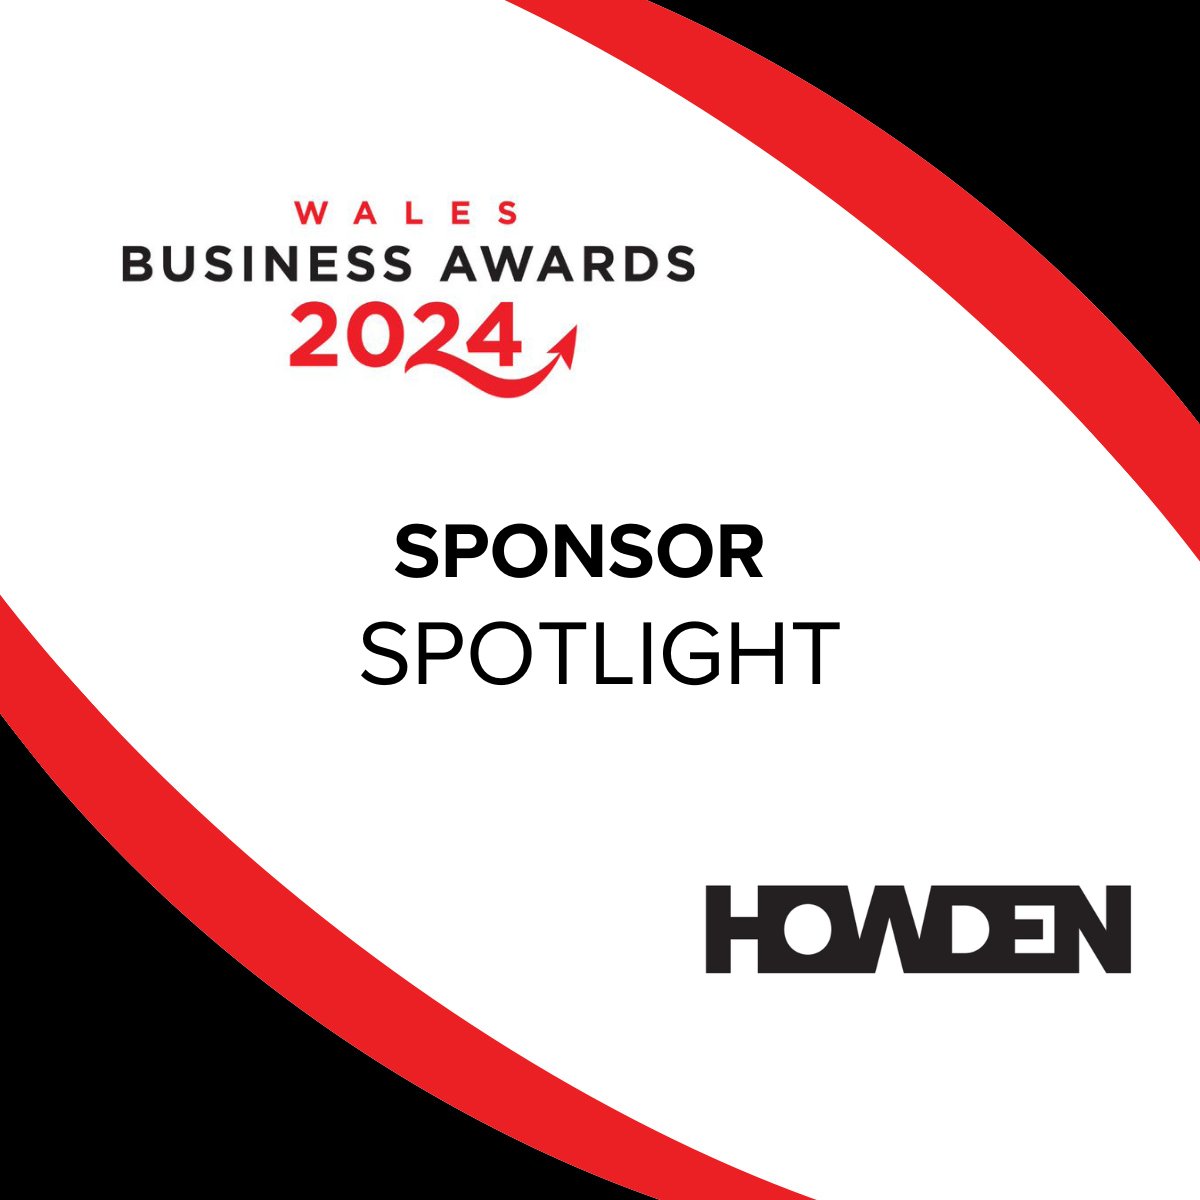 Insurance broker Howden is sponsoring two of our awards: the Employee Engagement Award and the Workplace Wellbeing Award: cw-seswm.com/news/introduci…